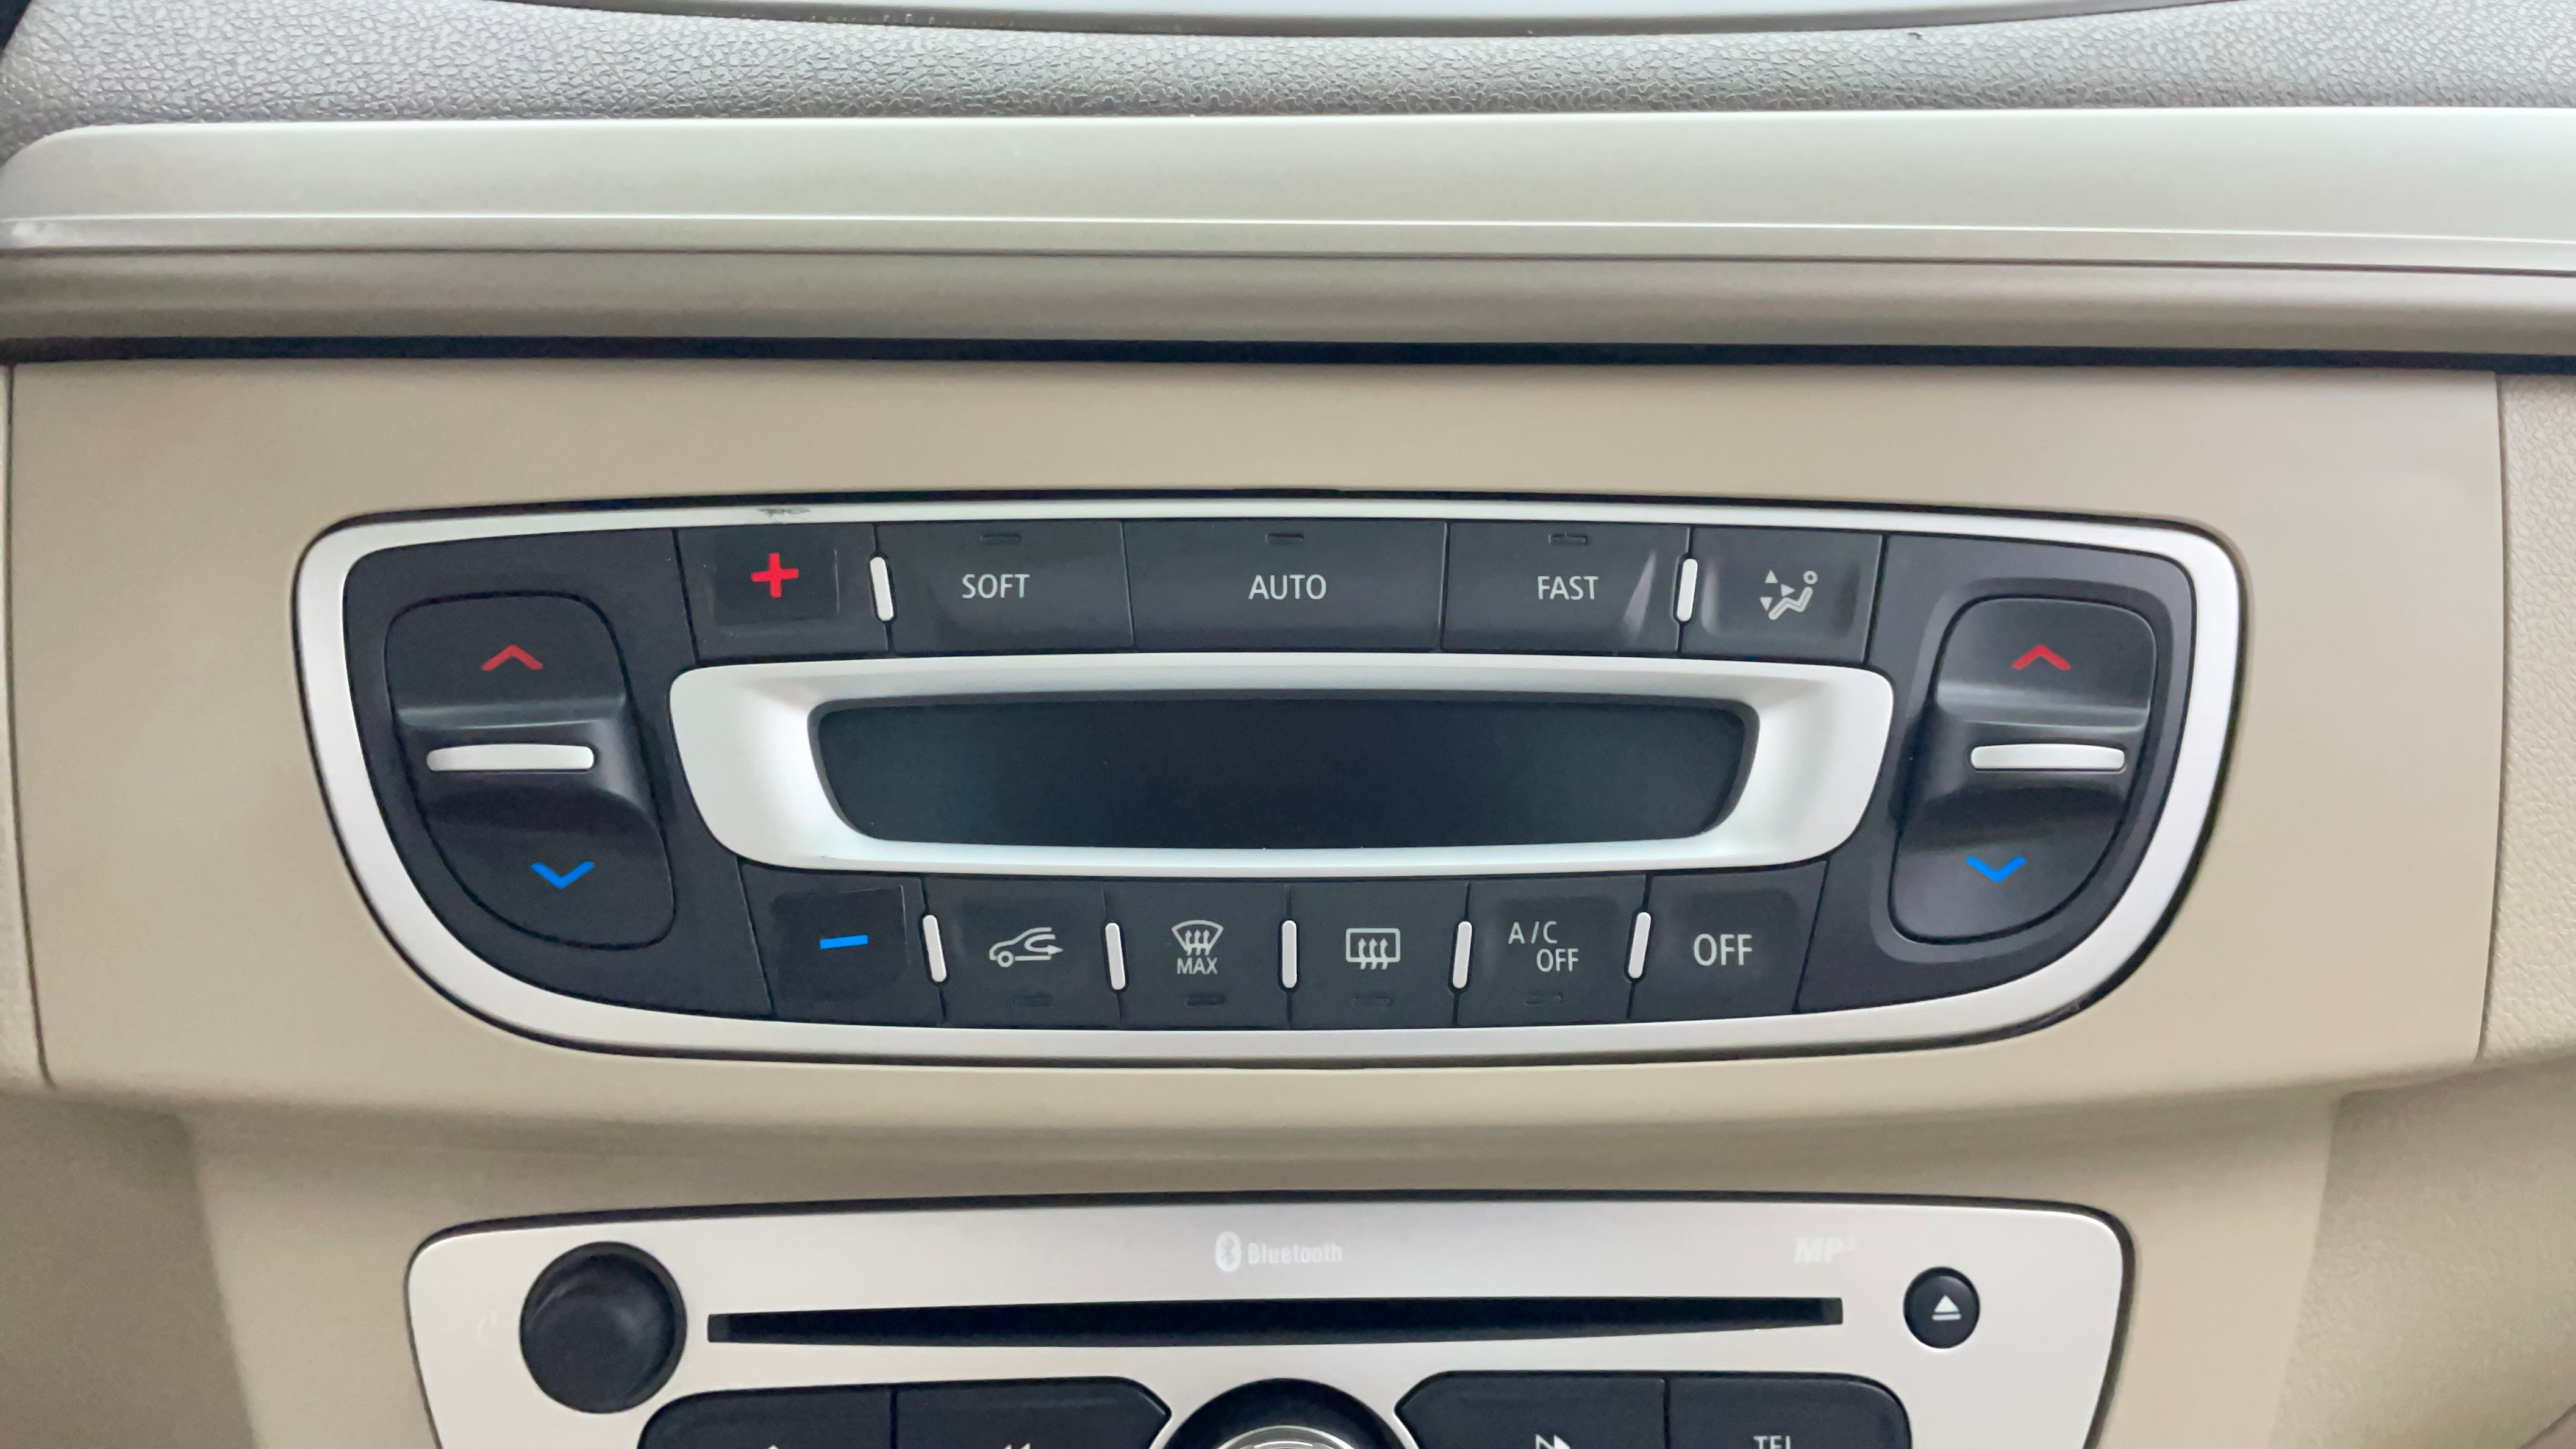 Renault Fluence-Automatic Climate Control